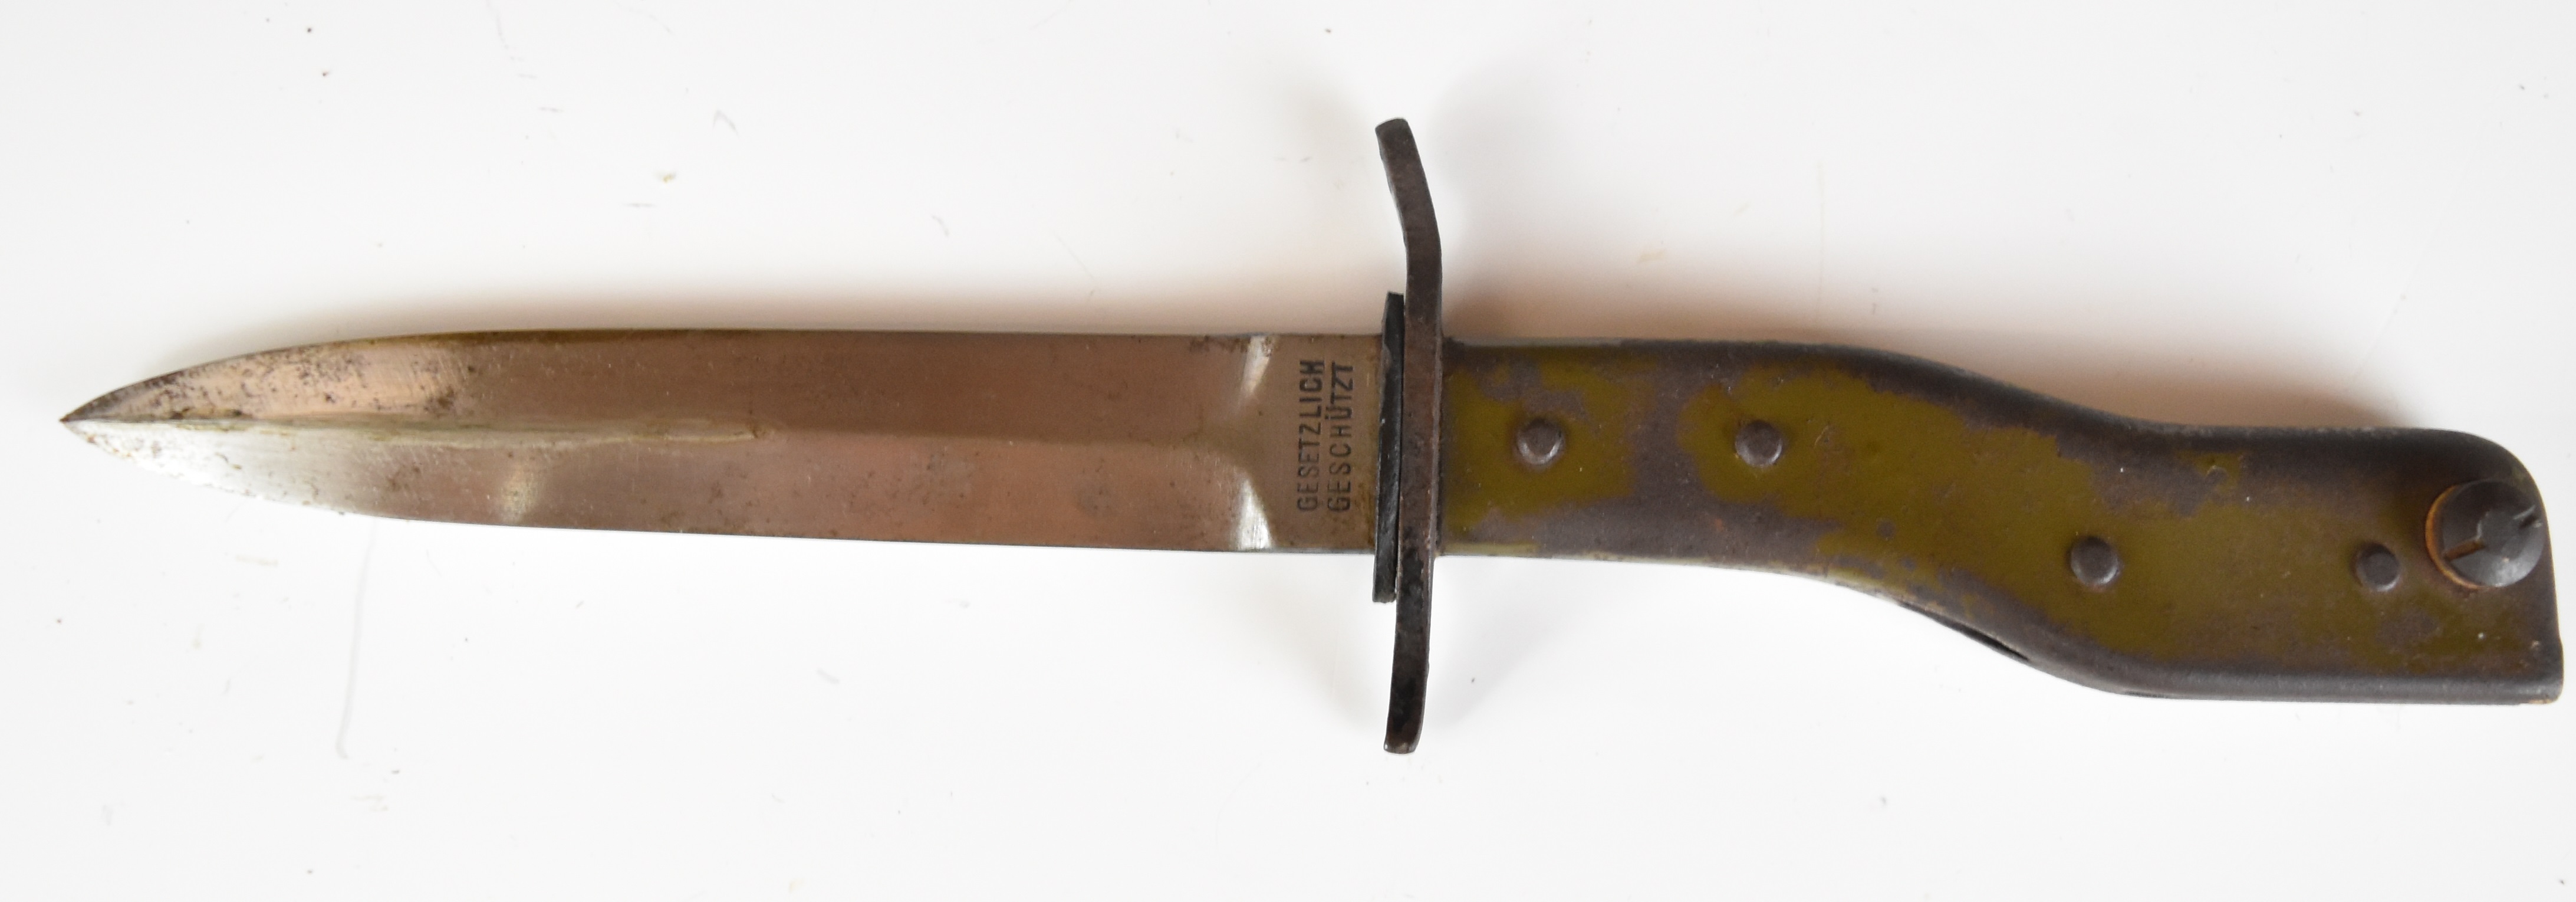 German WW1 crank handled trench knife bayonet with Demag Duisberg and Gesetzlich Geschutzt to - Image 7 of 8